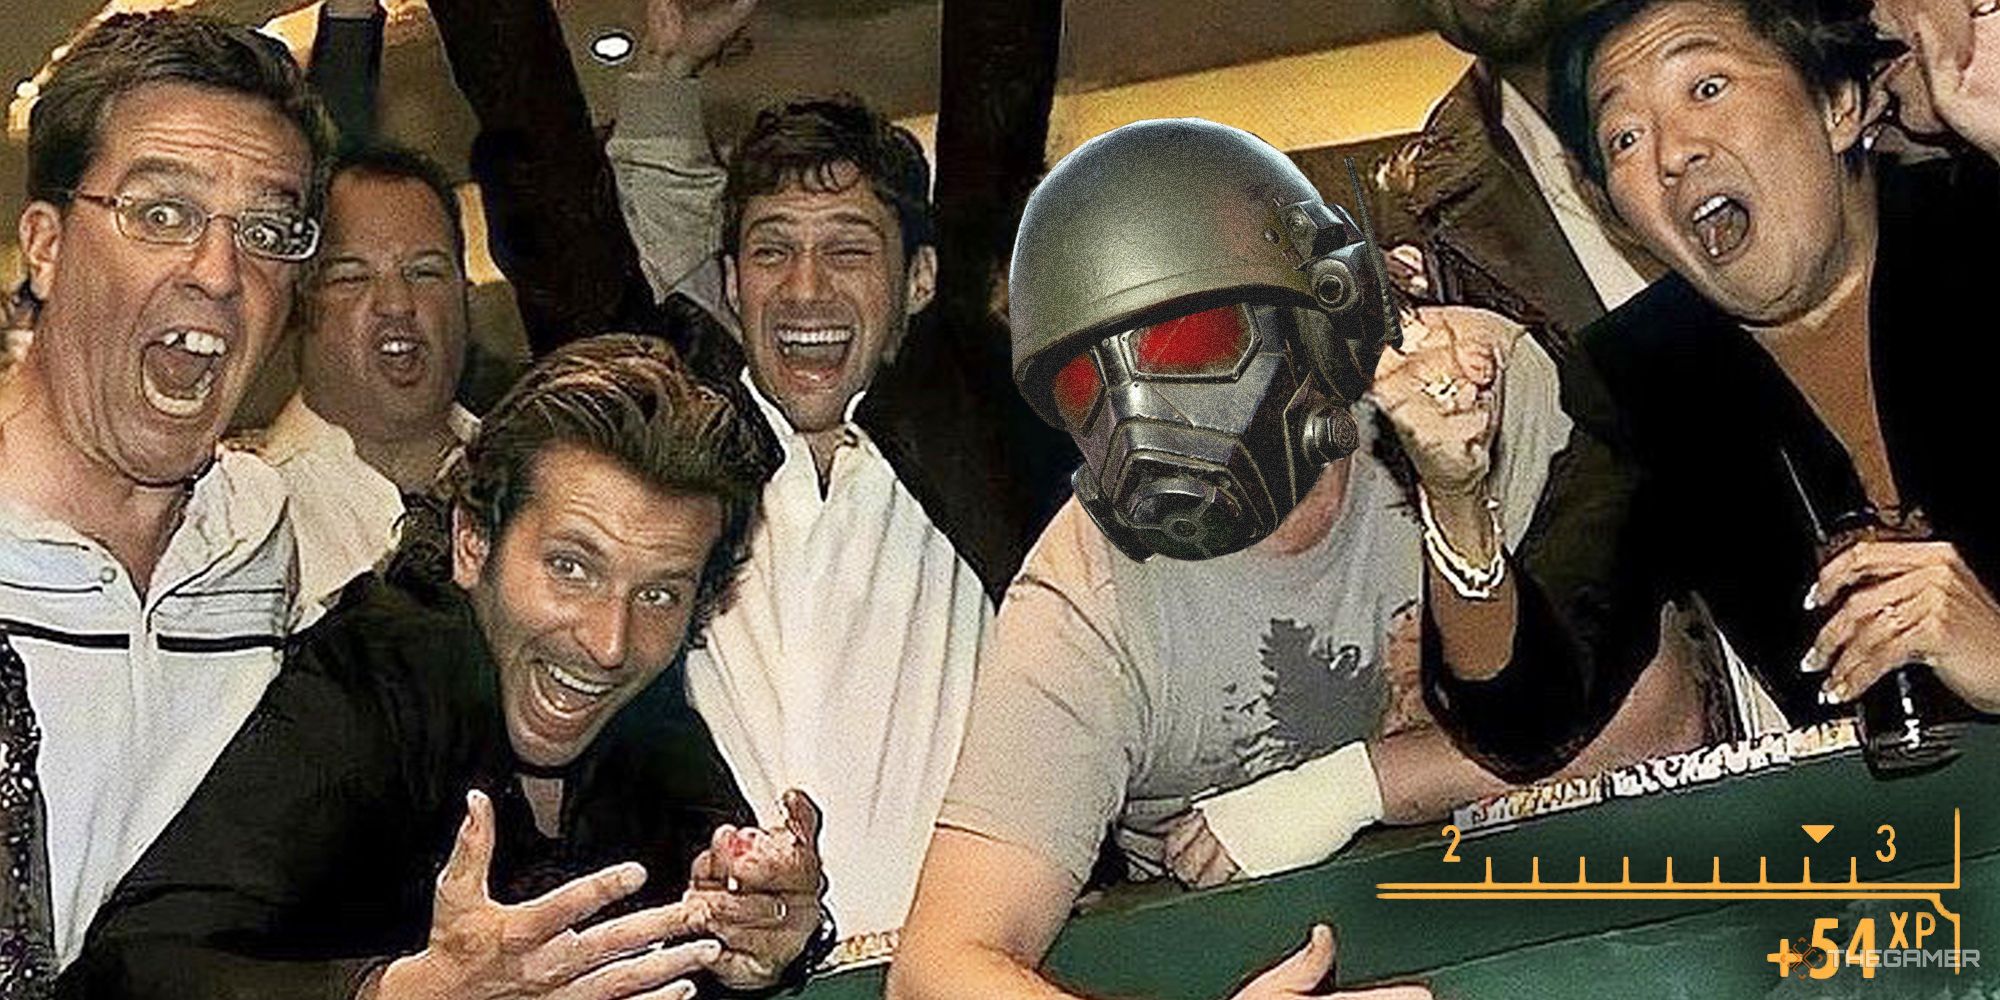 The Hangover movie everyone at the poker table but its The Courier with an NCR Ranger helmet from Fallout New Vegas